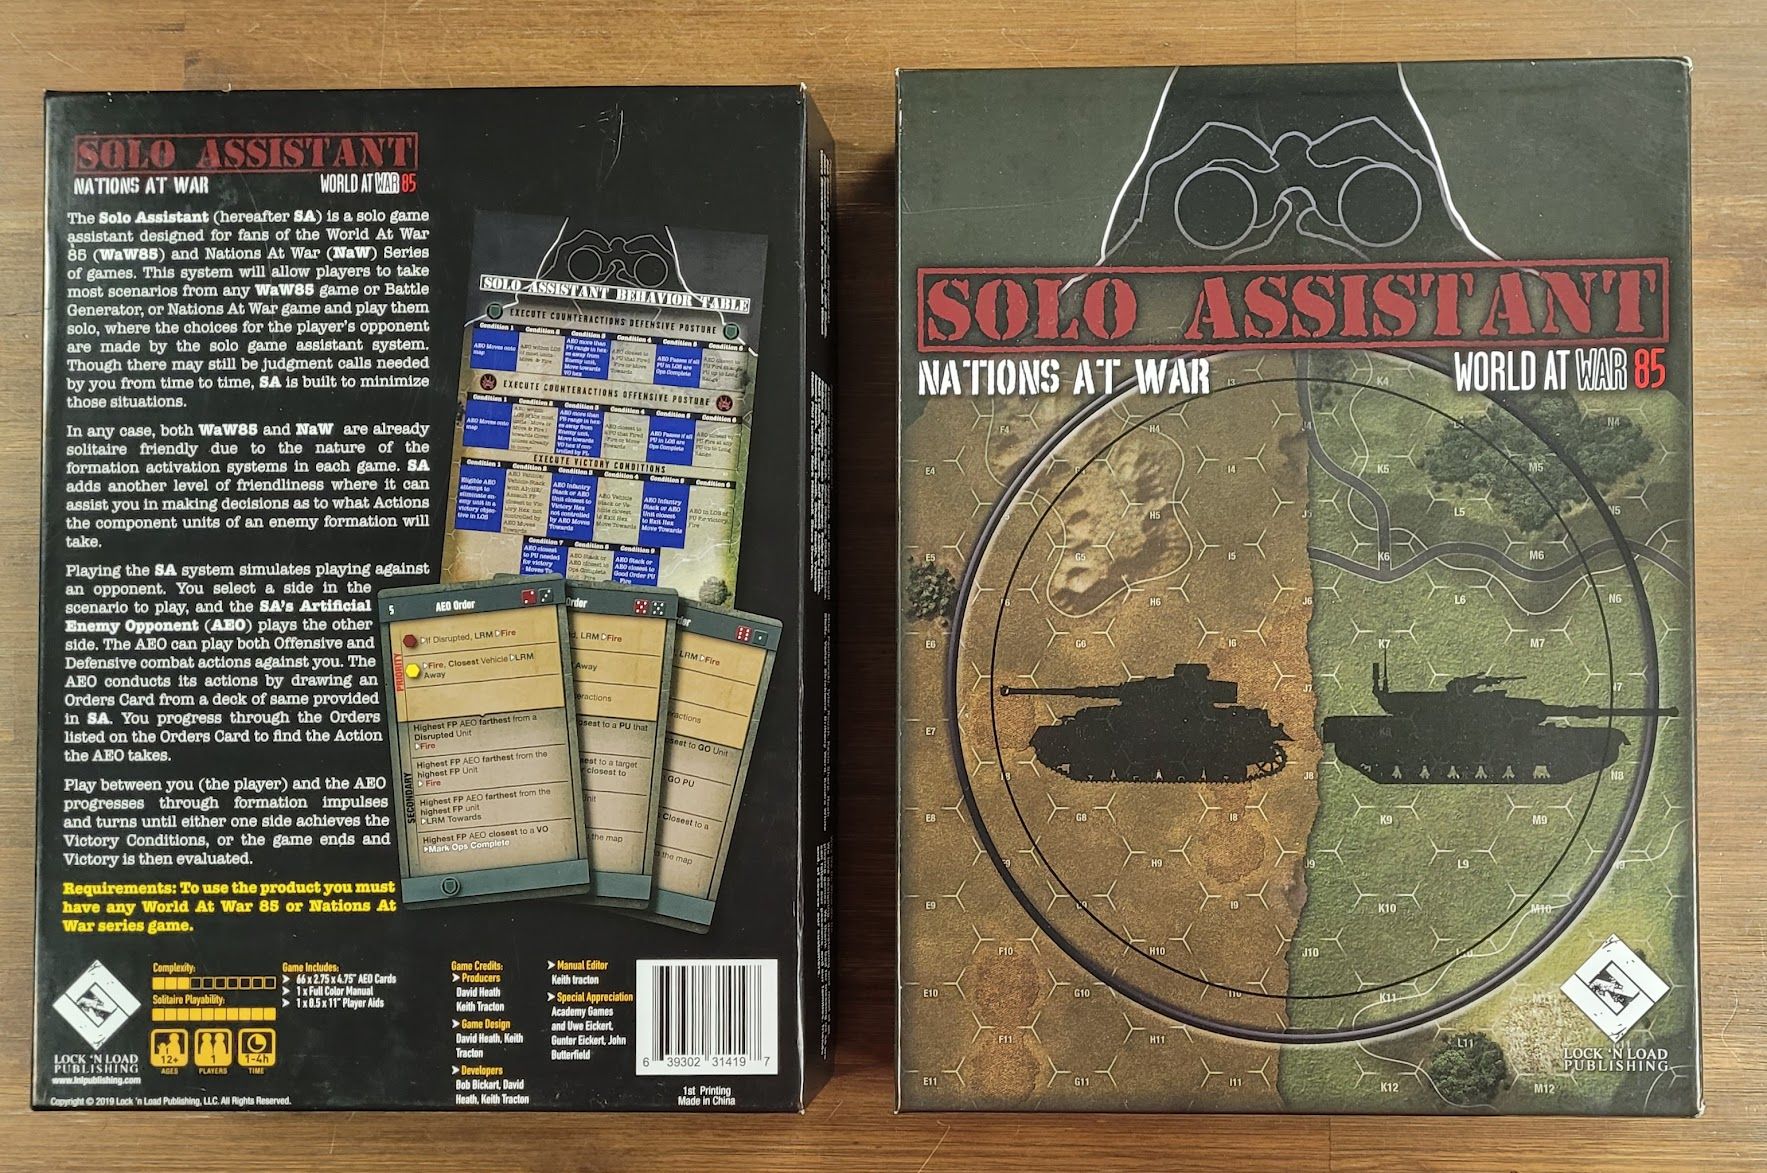 Product Details | Solo Assistant: Nations at War / World at War 85 